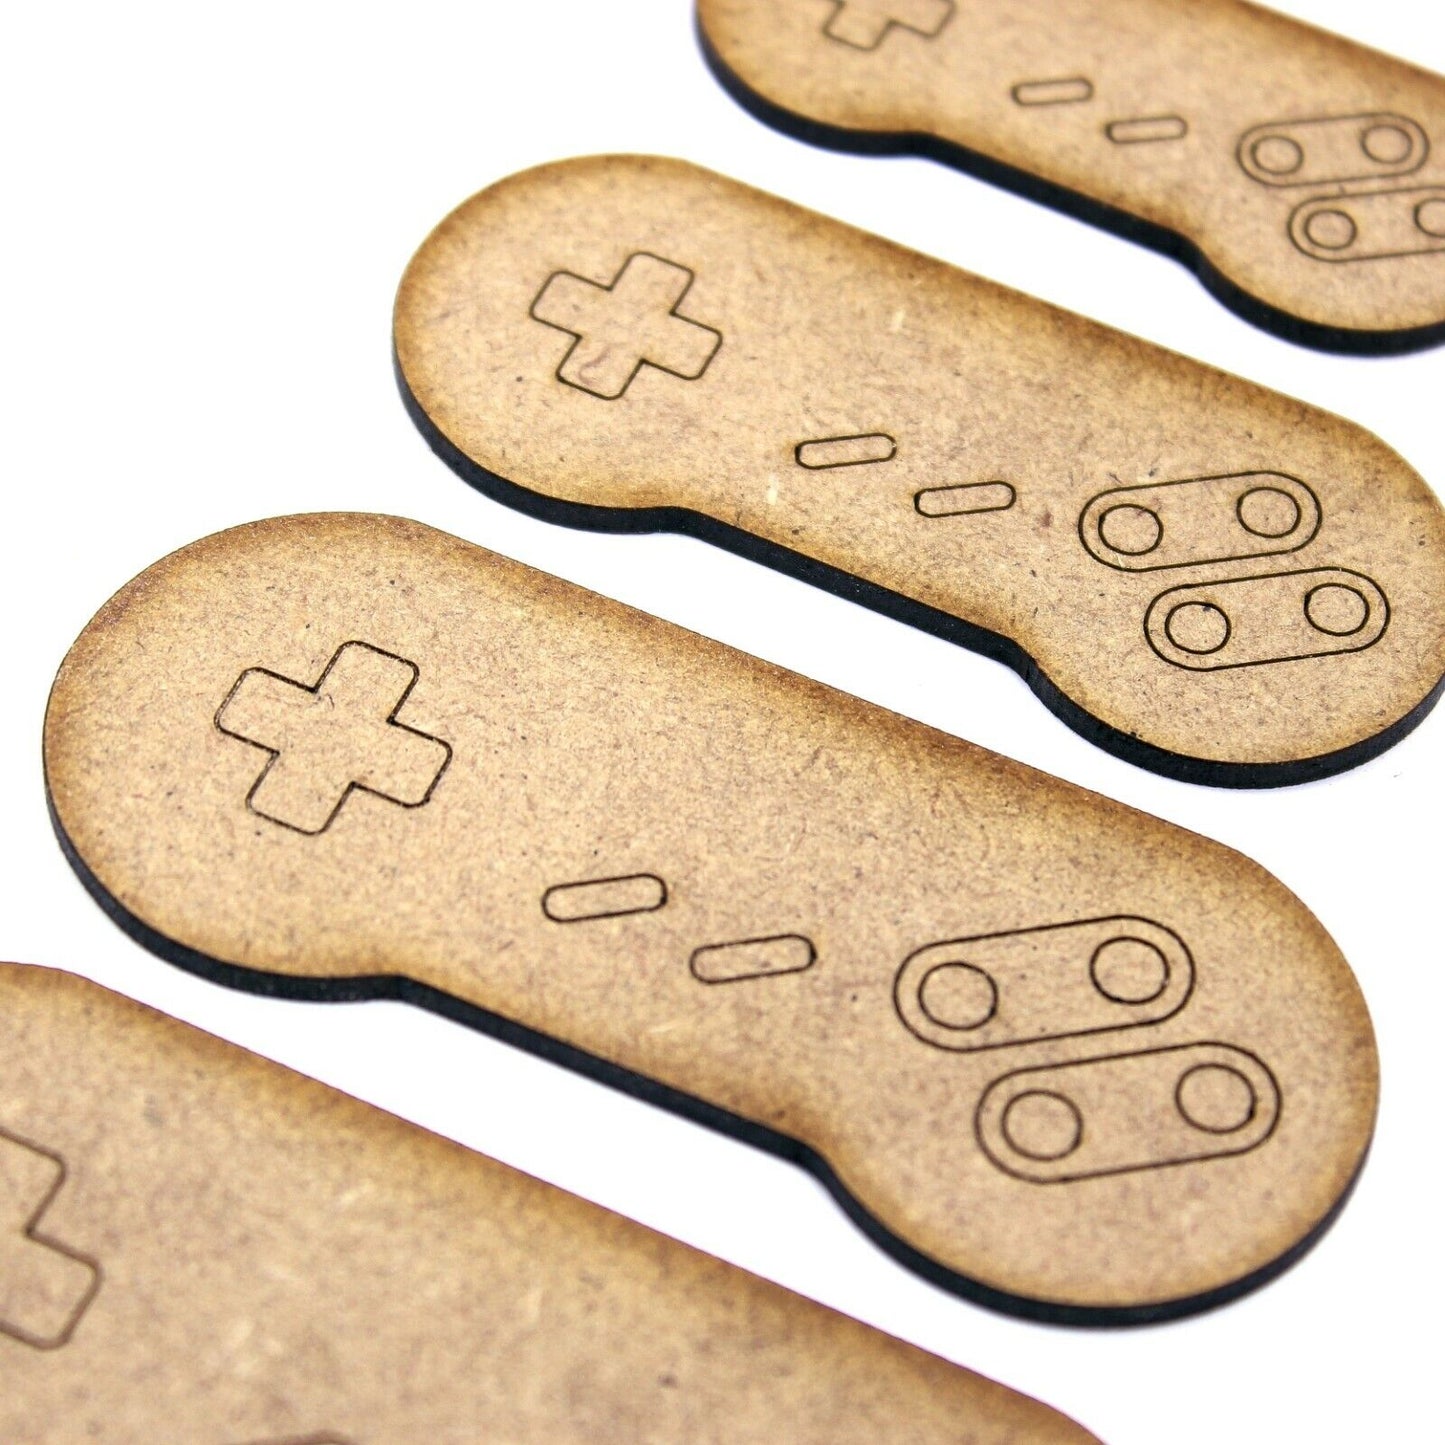 SNES Controller Craft Shape, Various Sizes, 2mm MDF Wood. Retro Gaming, Gamer